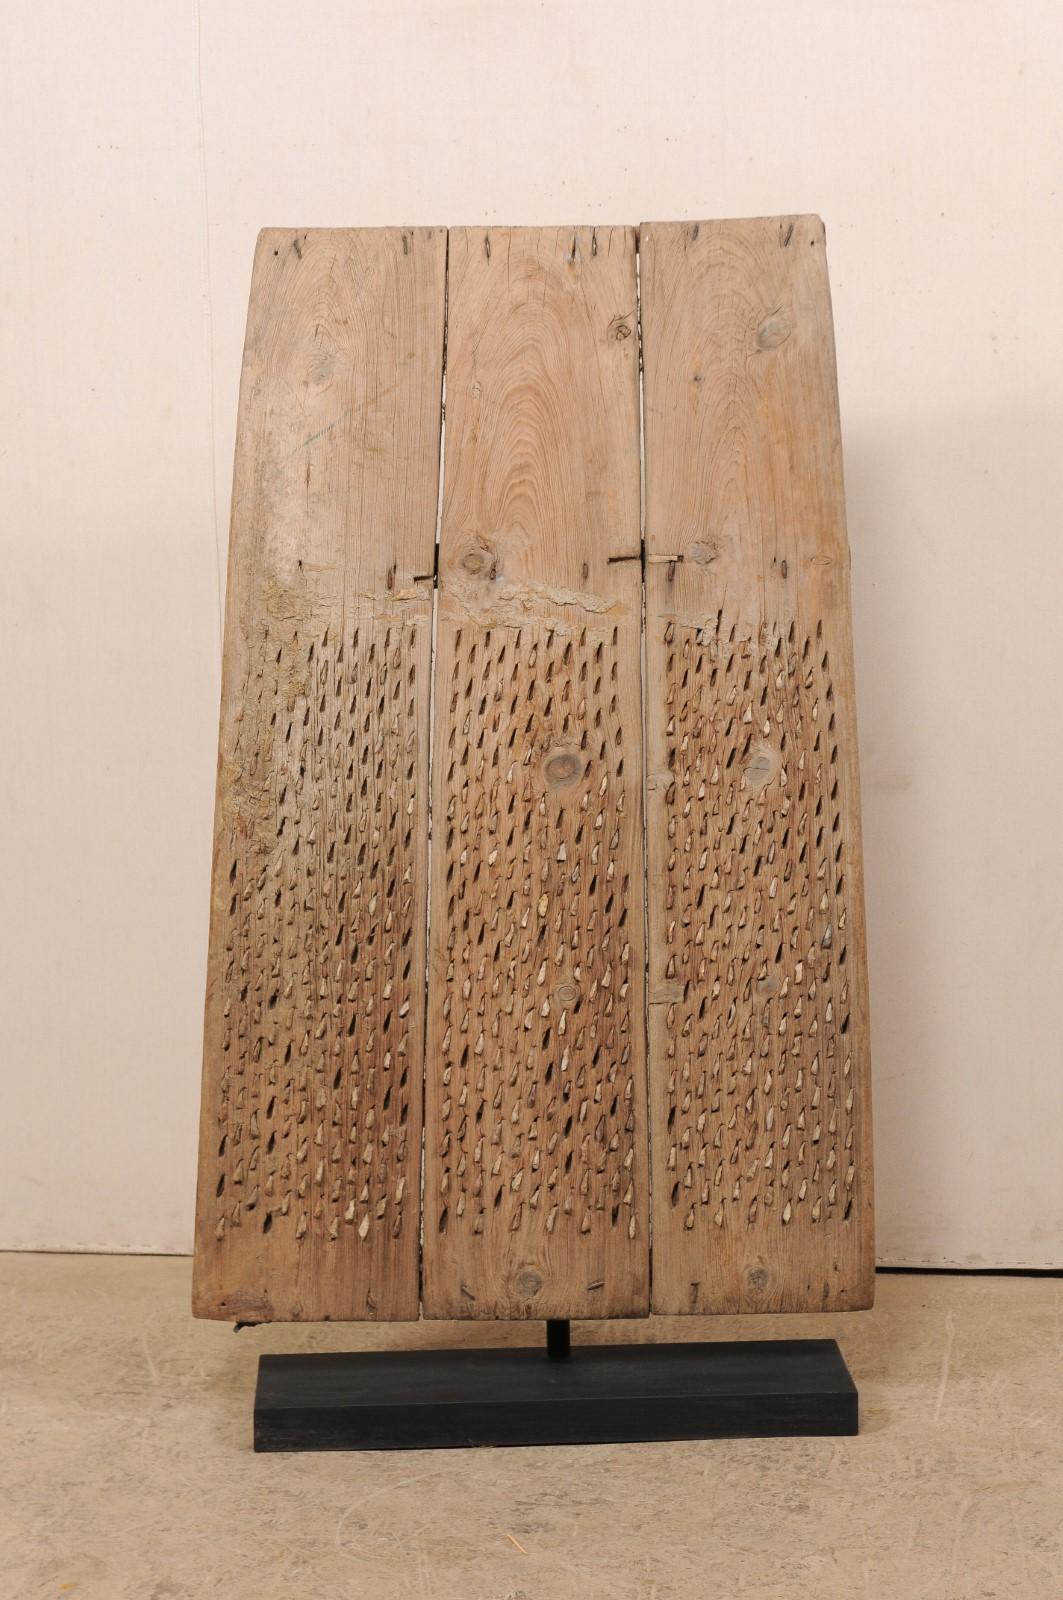 A Turkish agricultural threshing board from the early 20th century. This antique threshing board from Turkey is a particularly nice example, having three wooden boards (often you will see smaller ones, made up of two boards). The thick boards, when